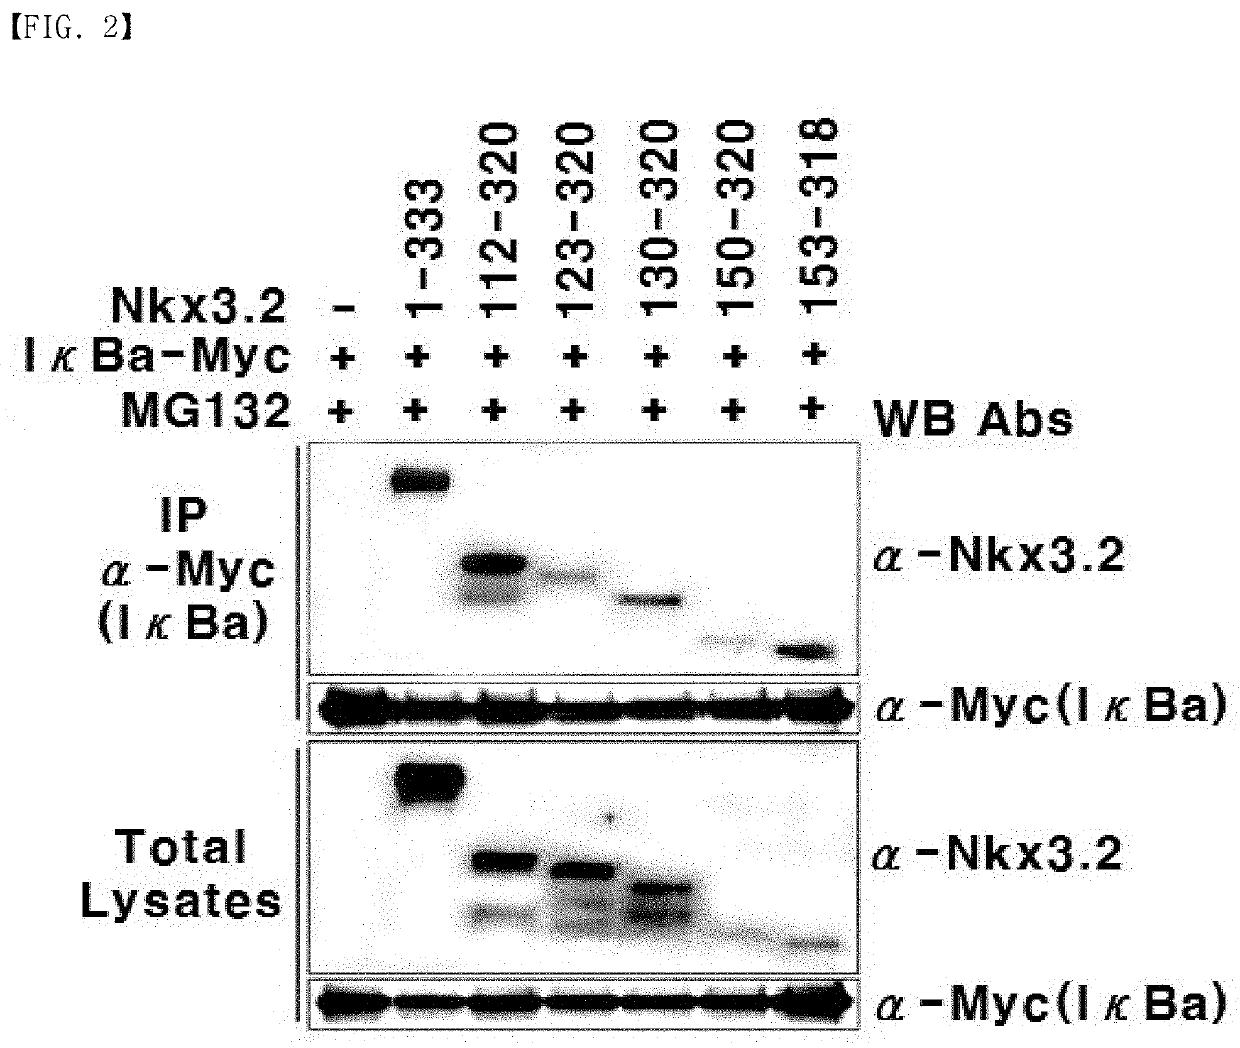 Nkx3.2 fragment and pharmaceutical composition comprising same as active ingredient